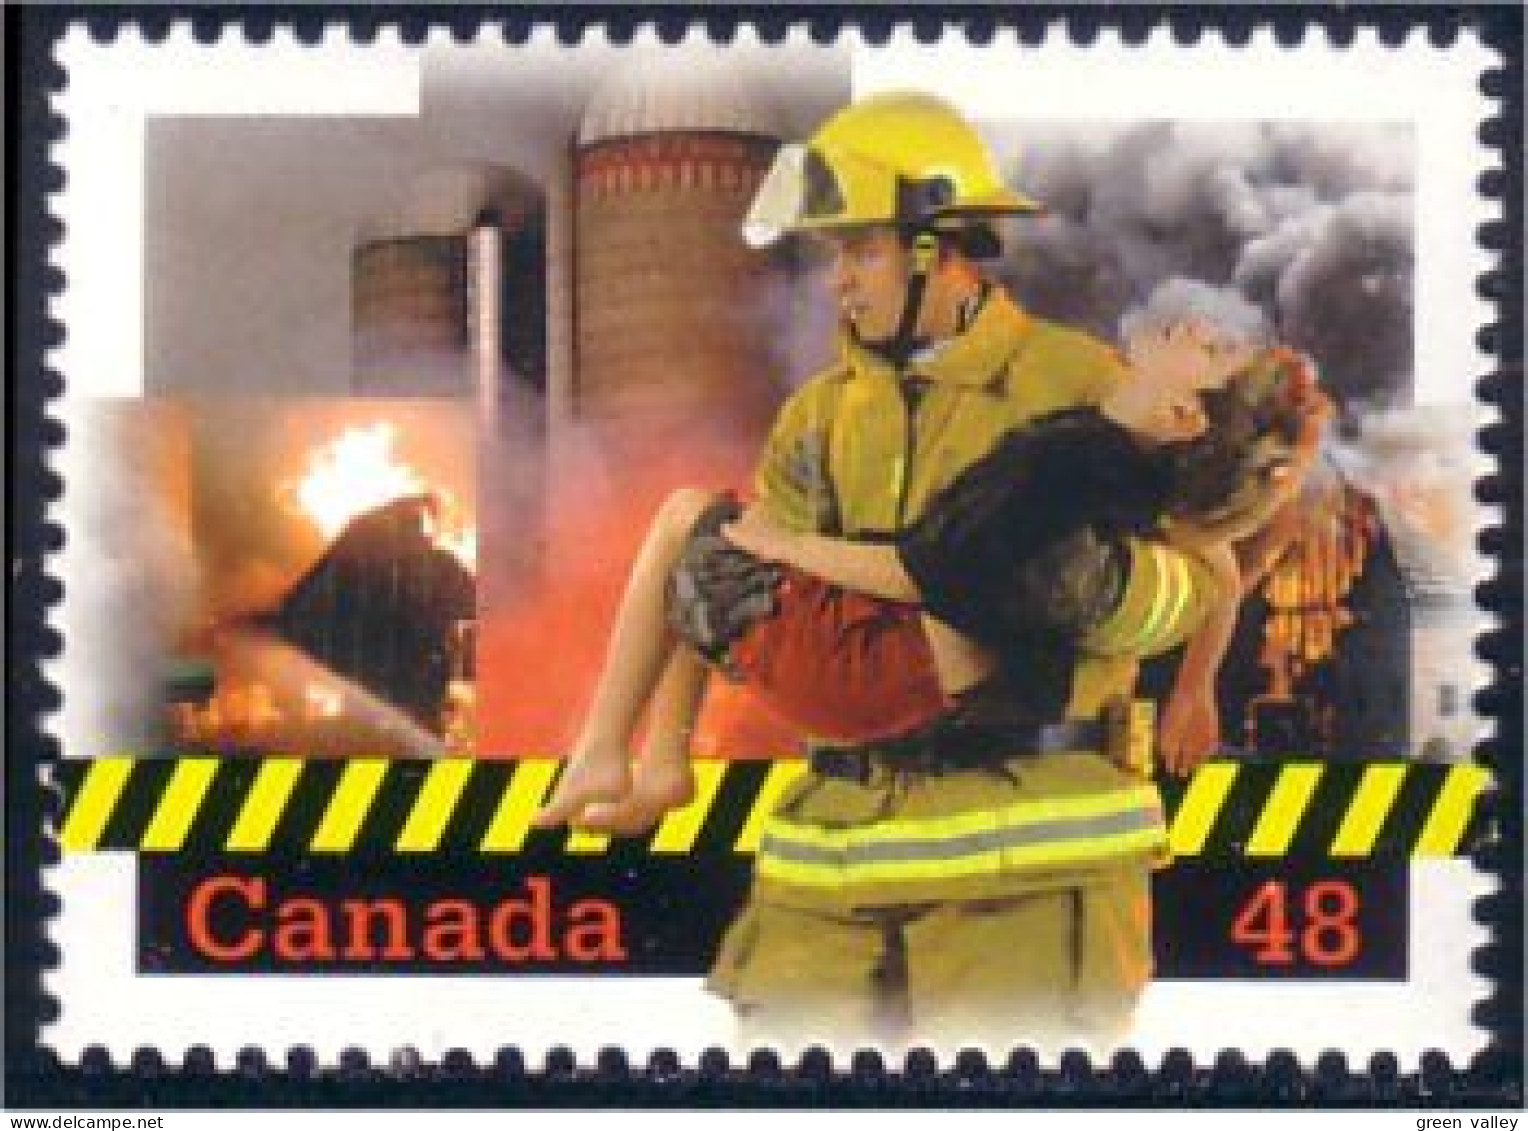 Canada Pompier Firefighter Sauvetage Save Life MNH ** Neuf SC (C19-86c) - First Aid